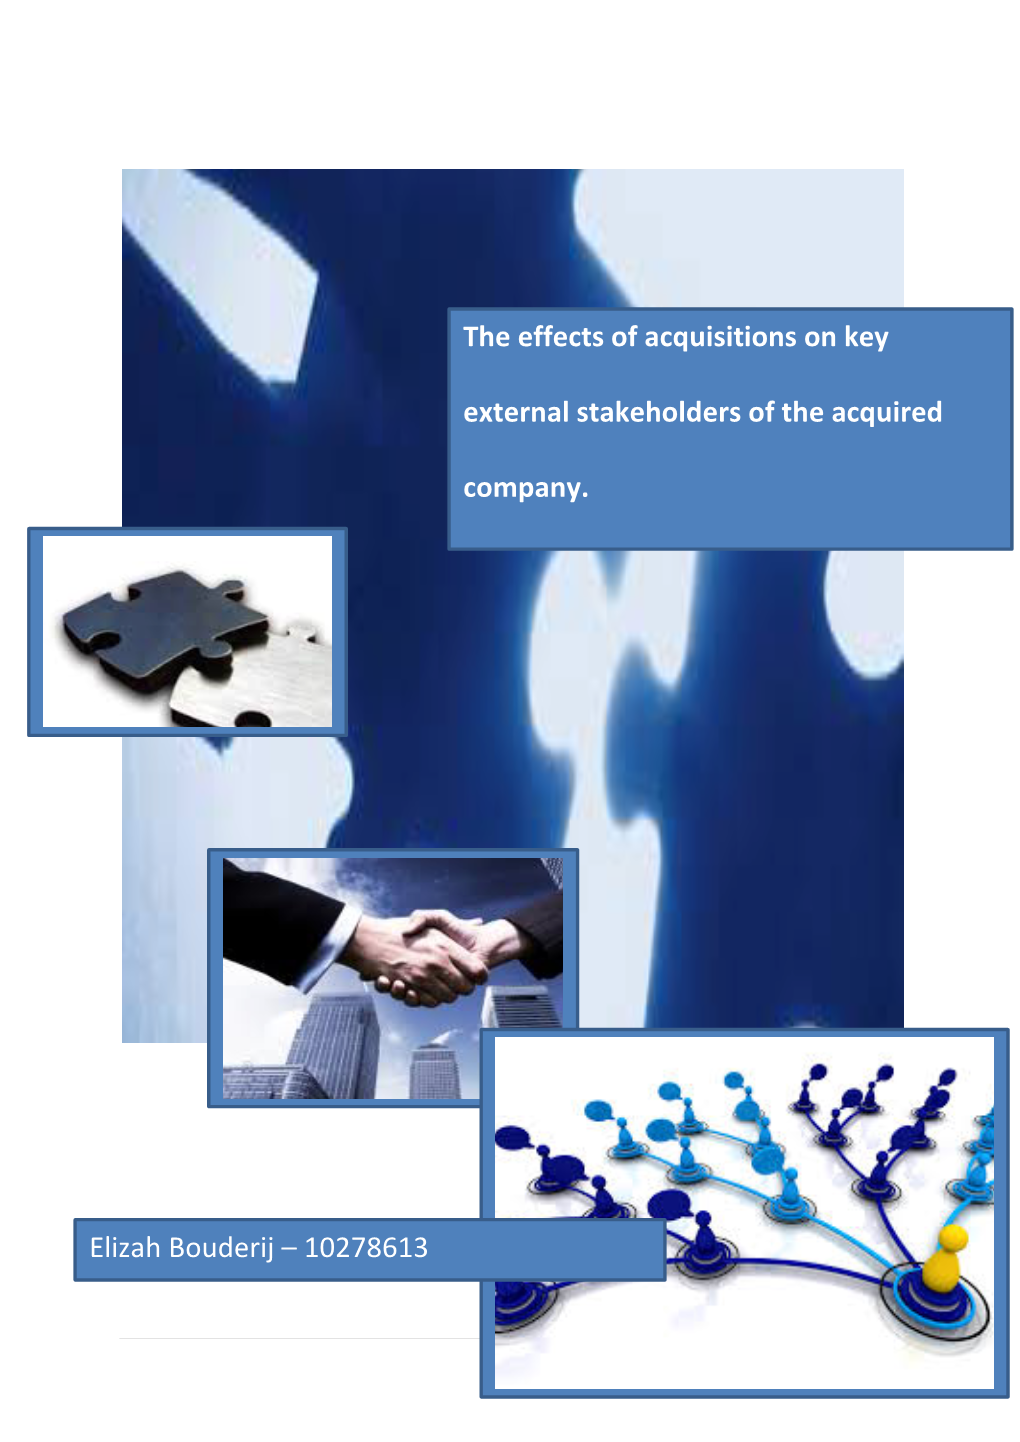 The Effects of Acquisitions on Key External Stakeholders of the Acquired Company?”